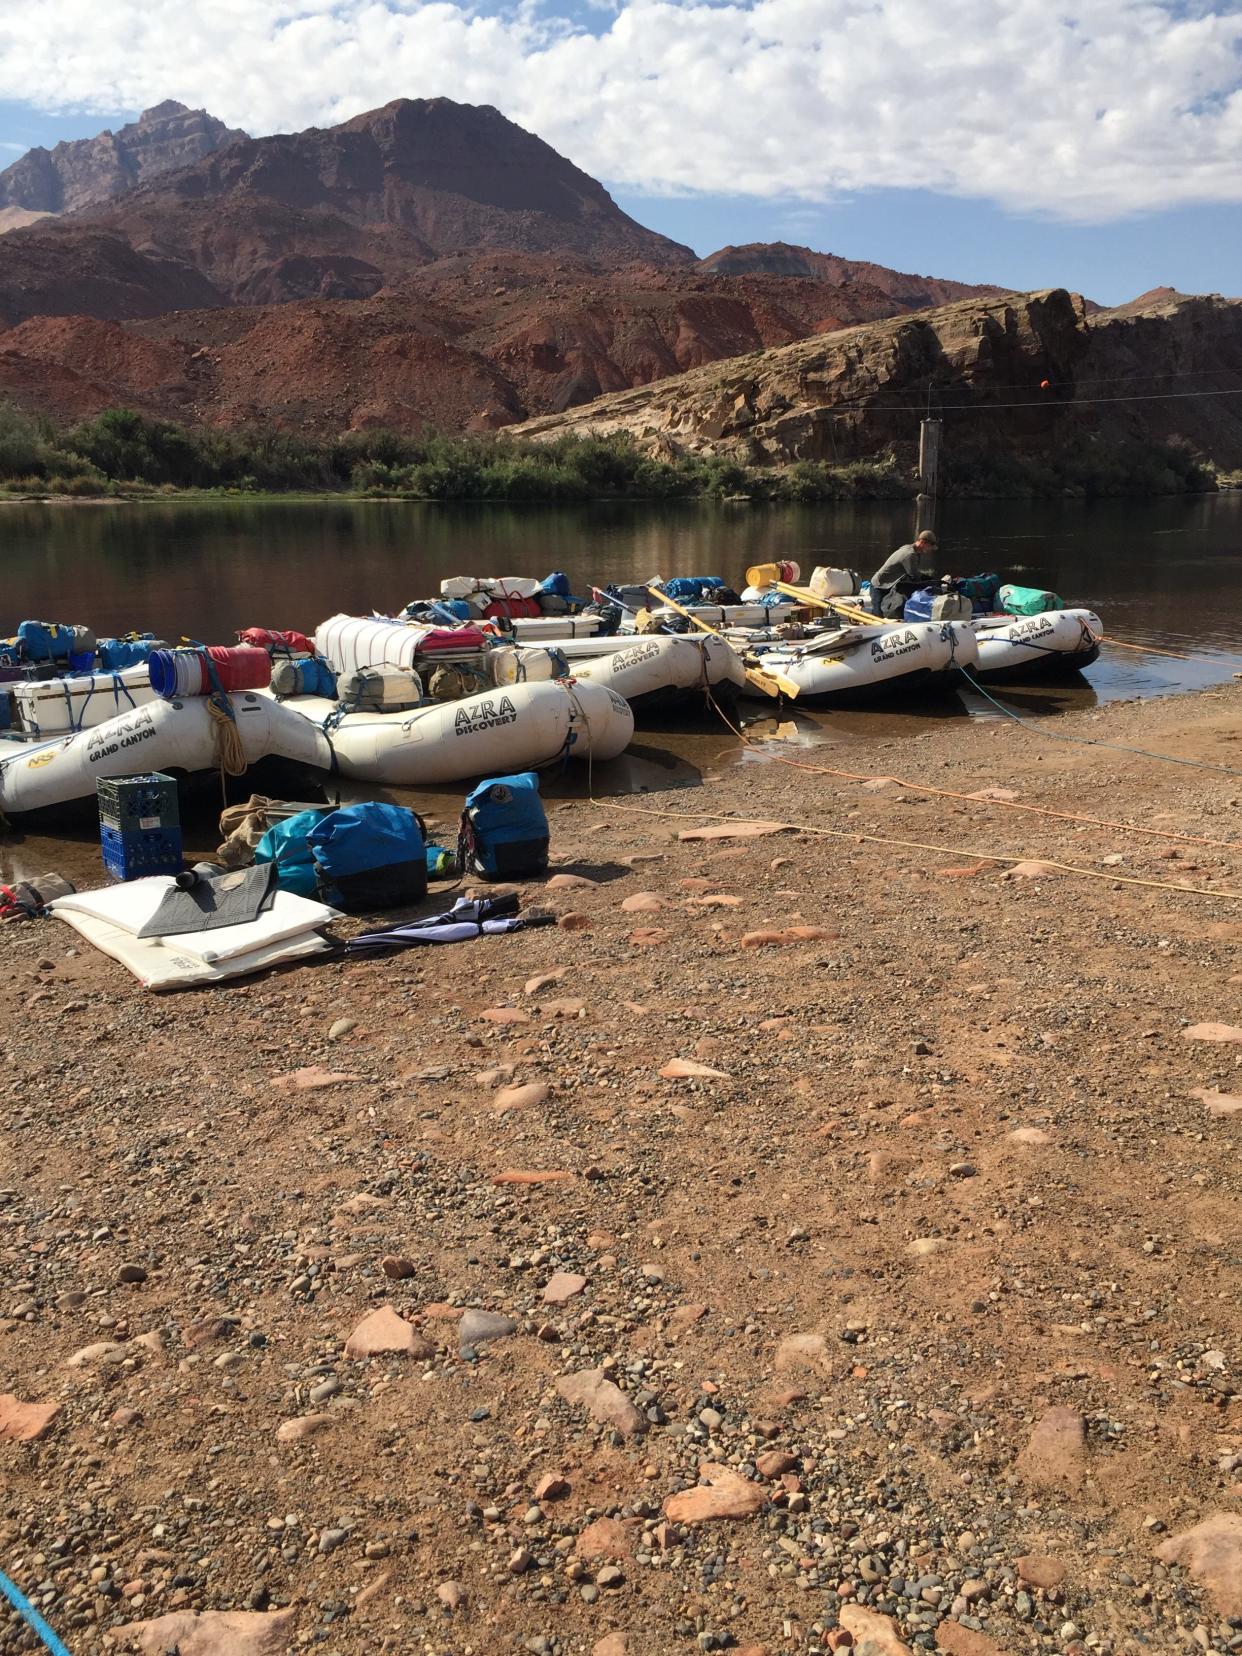 Provisions are loaded onto rafts at Lee's Ferry, the beginning of our Colorado River adventure.